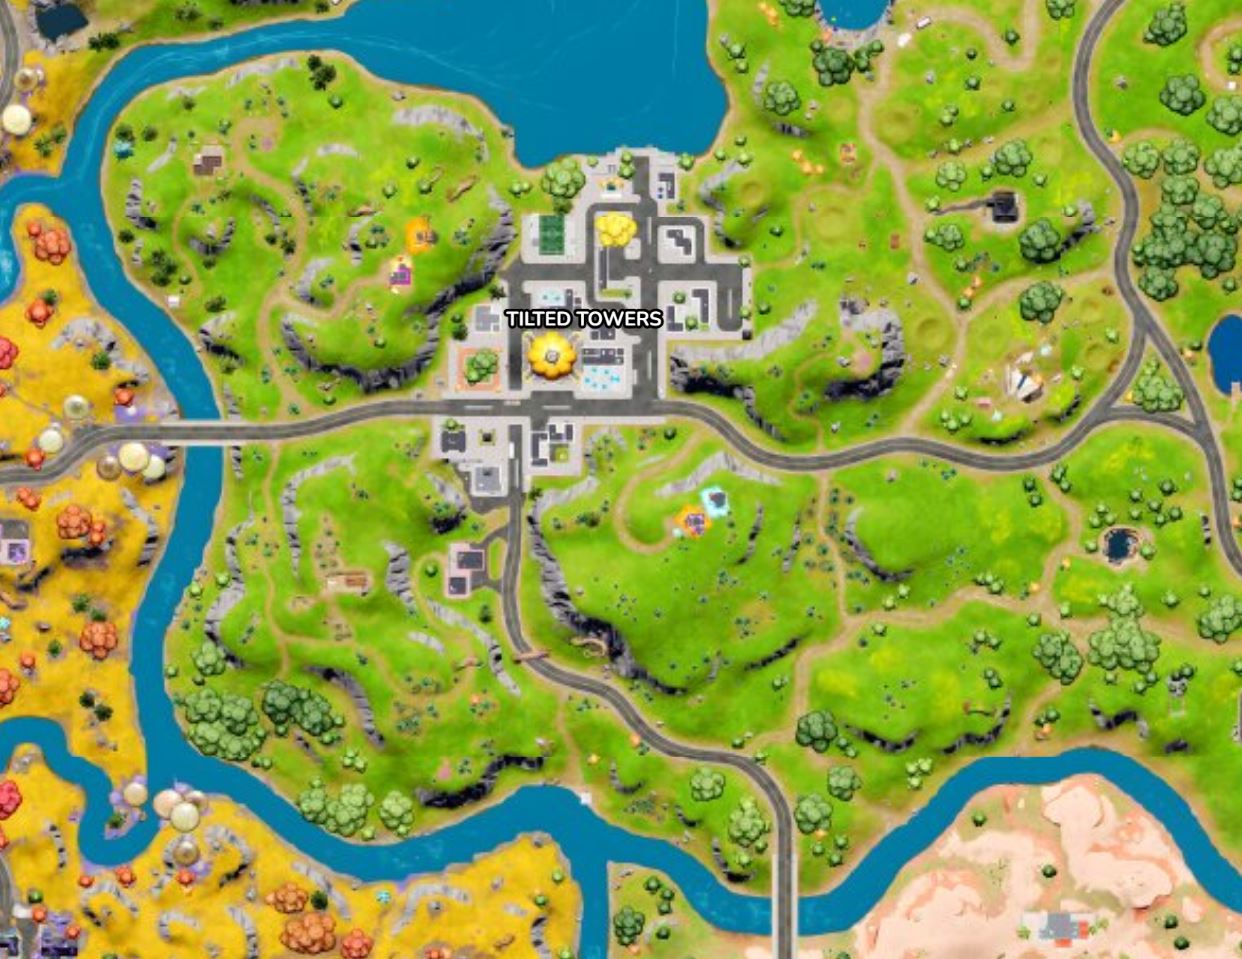 Map of Tilted Towers in Fortnite.